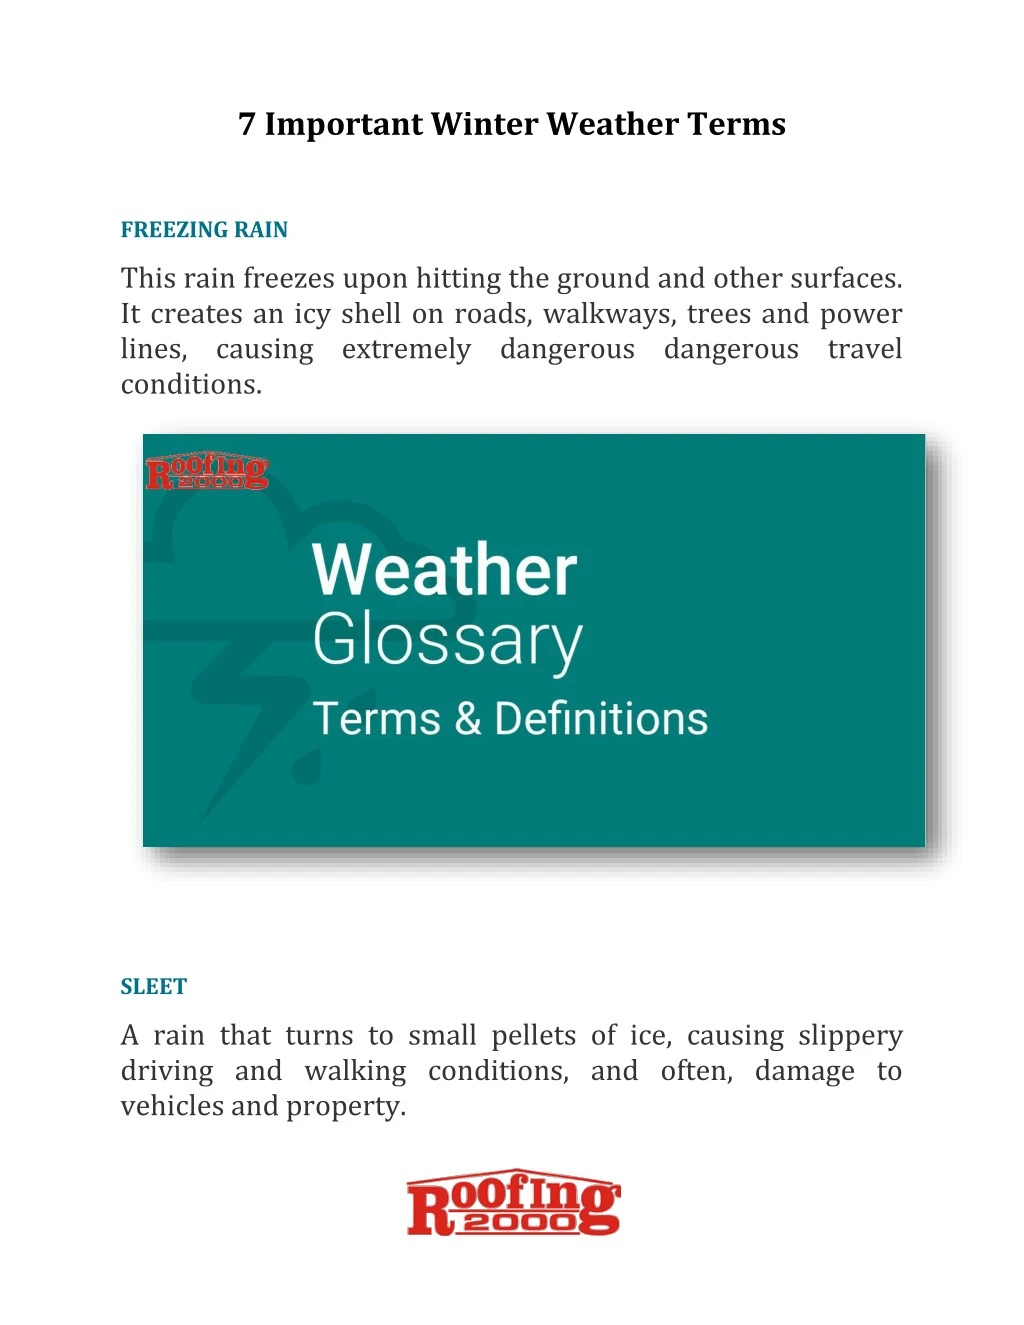 7 important winter weather terms